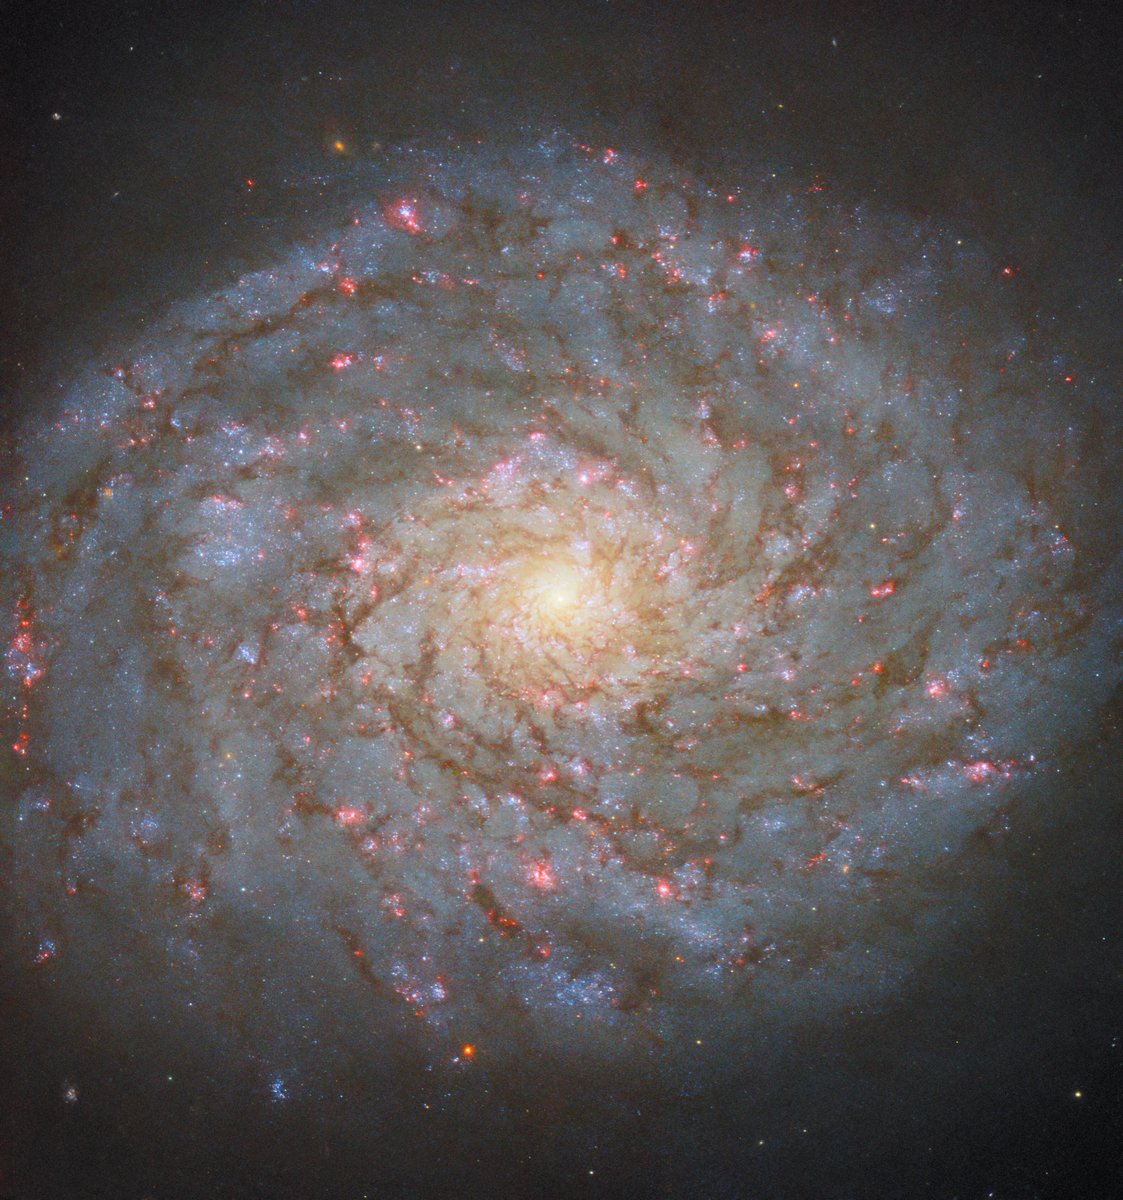 A galaxy fit for a queen 👑 Located in the constellation Coma Berenices, named after Queen Berenice II of Egypt, the jewel-bright spiral galaxy NGC 4689 lies 54 million light-years from Earth. Uncover more about this week's #HubbleFriday view: go.nasa.gov/3QV29gP